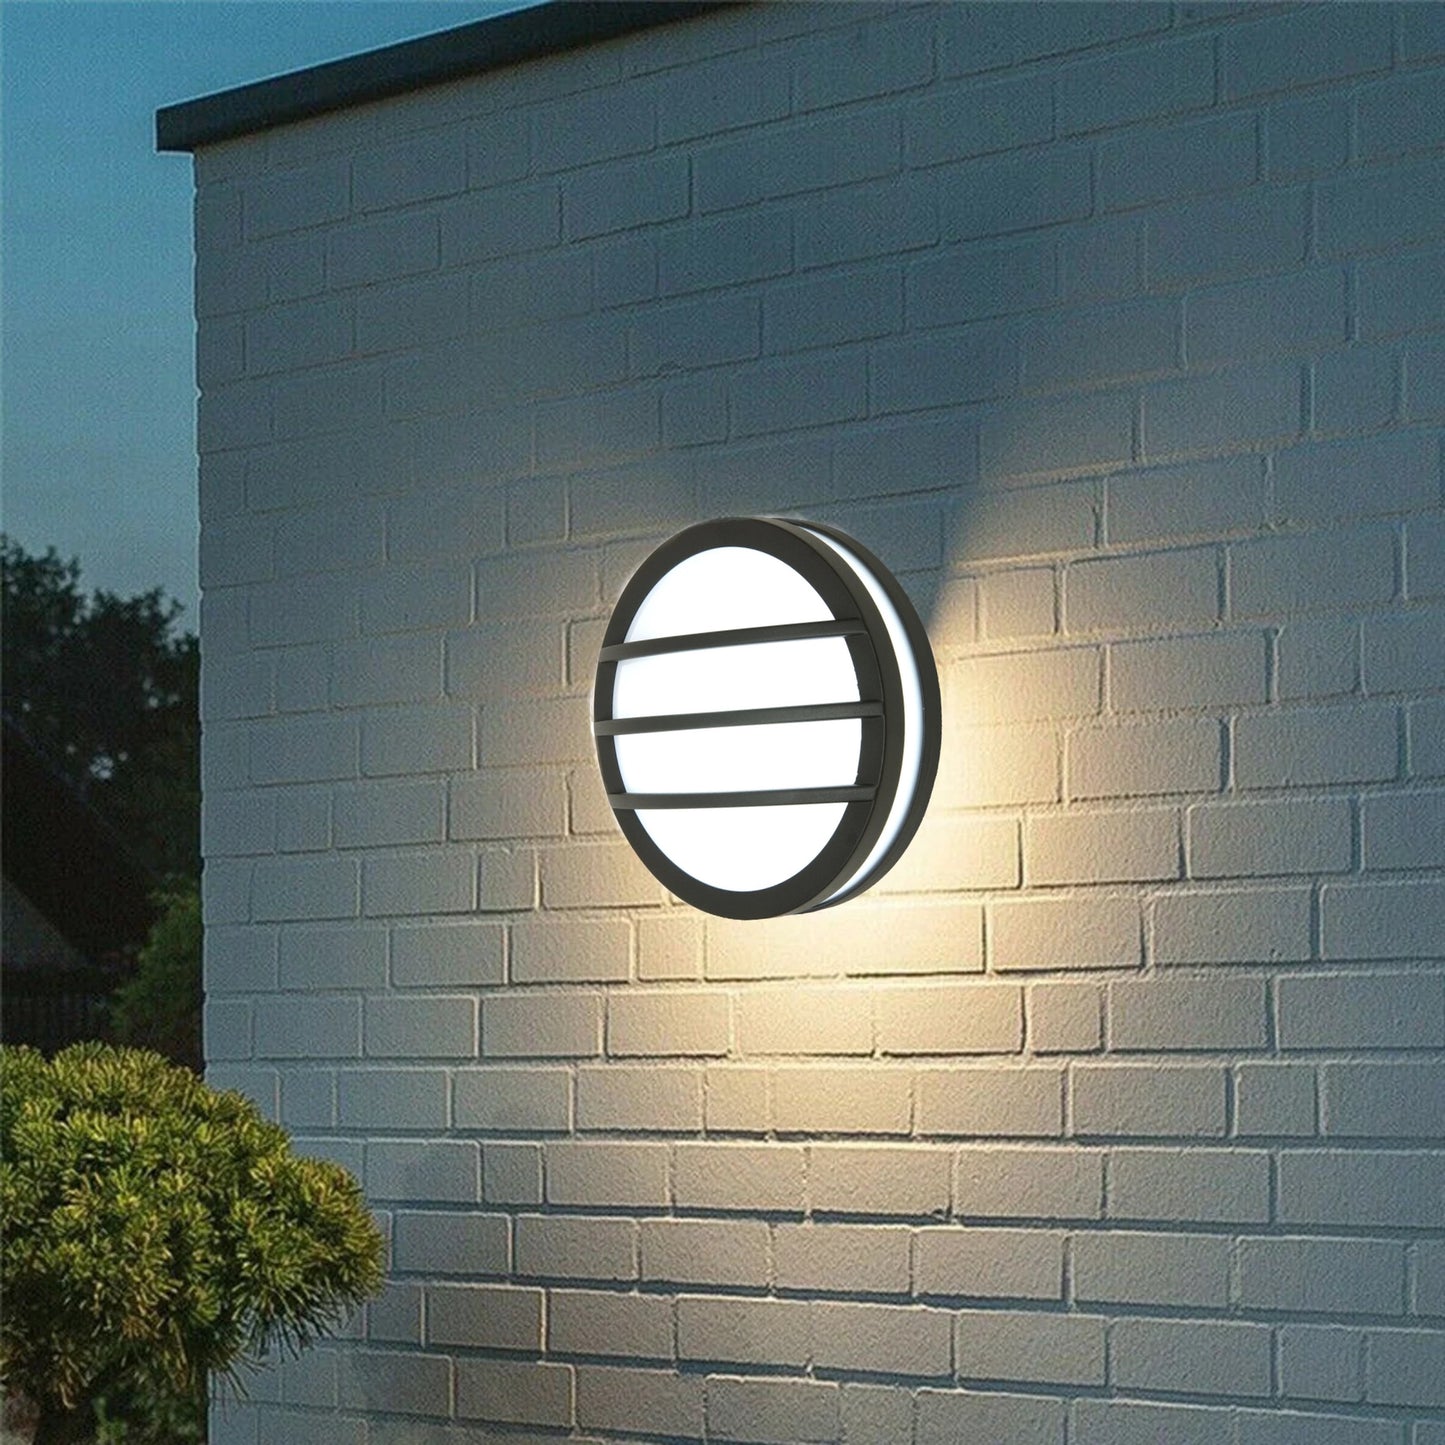 Our Hallie dark grey aluminium wall mounted round outdoor light with built in LED's would look perfect in a modern or more traditional home design. Outside wall lights can provide atmospheric light in your garden, at the front door or on the terrace as well as a great security solution. It is designed for durability and longevity with its robust material producing a fully weatherproof and water resistant light fitting.